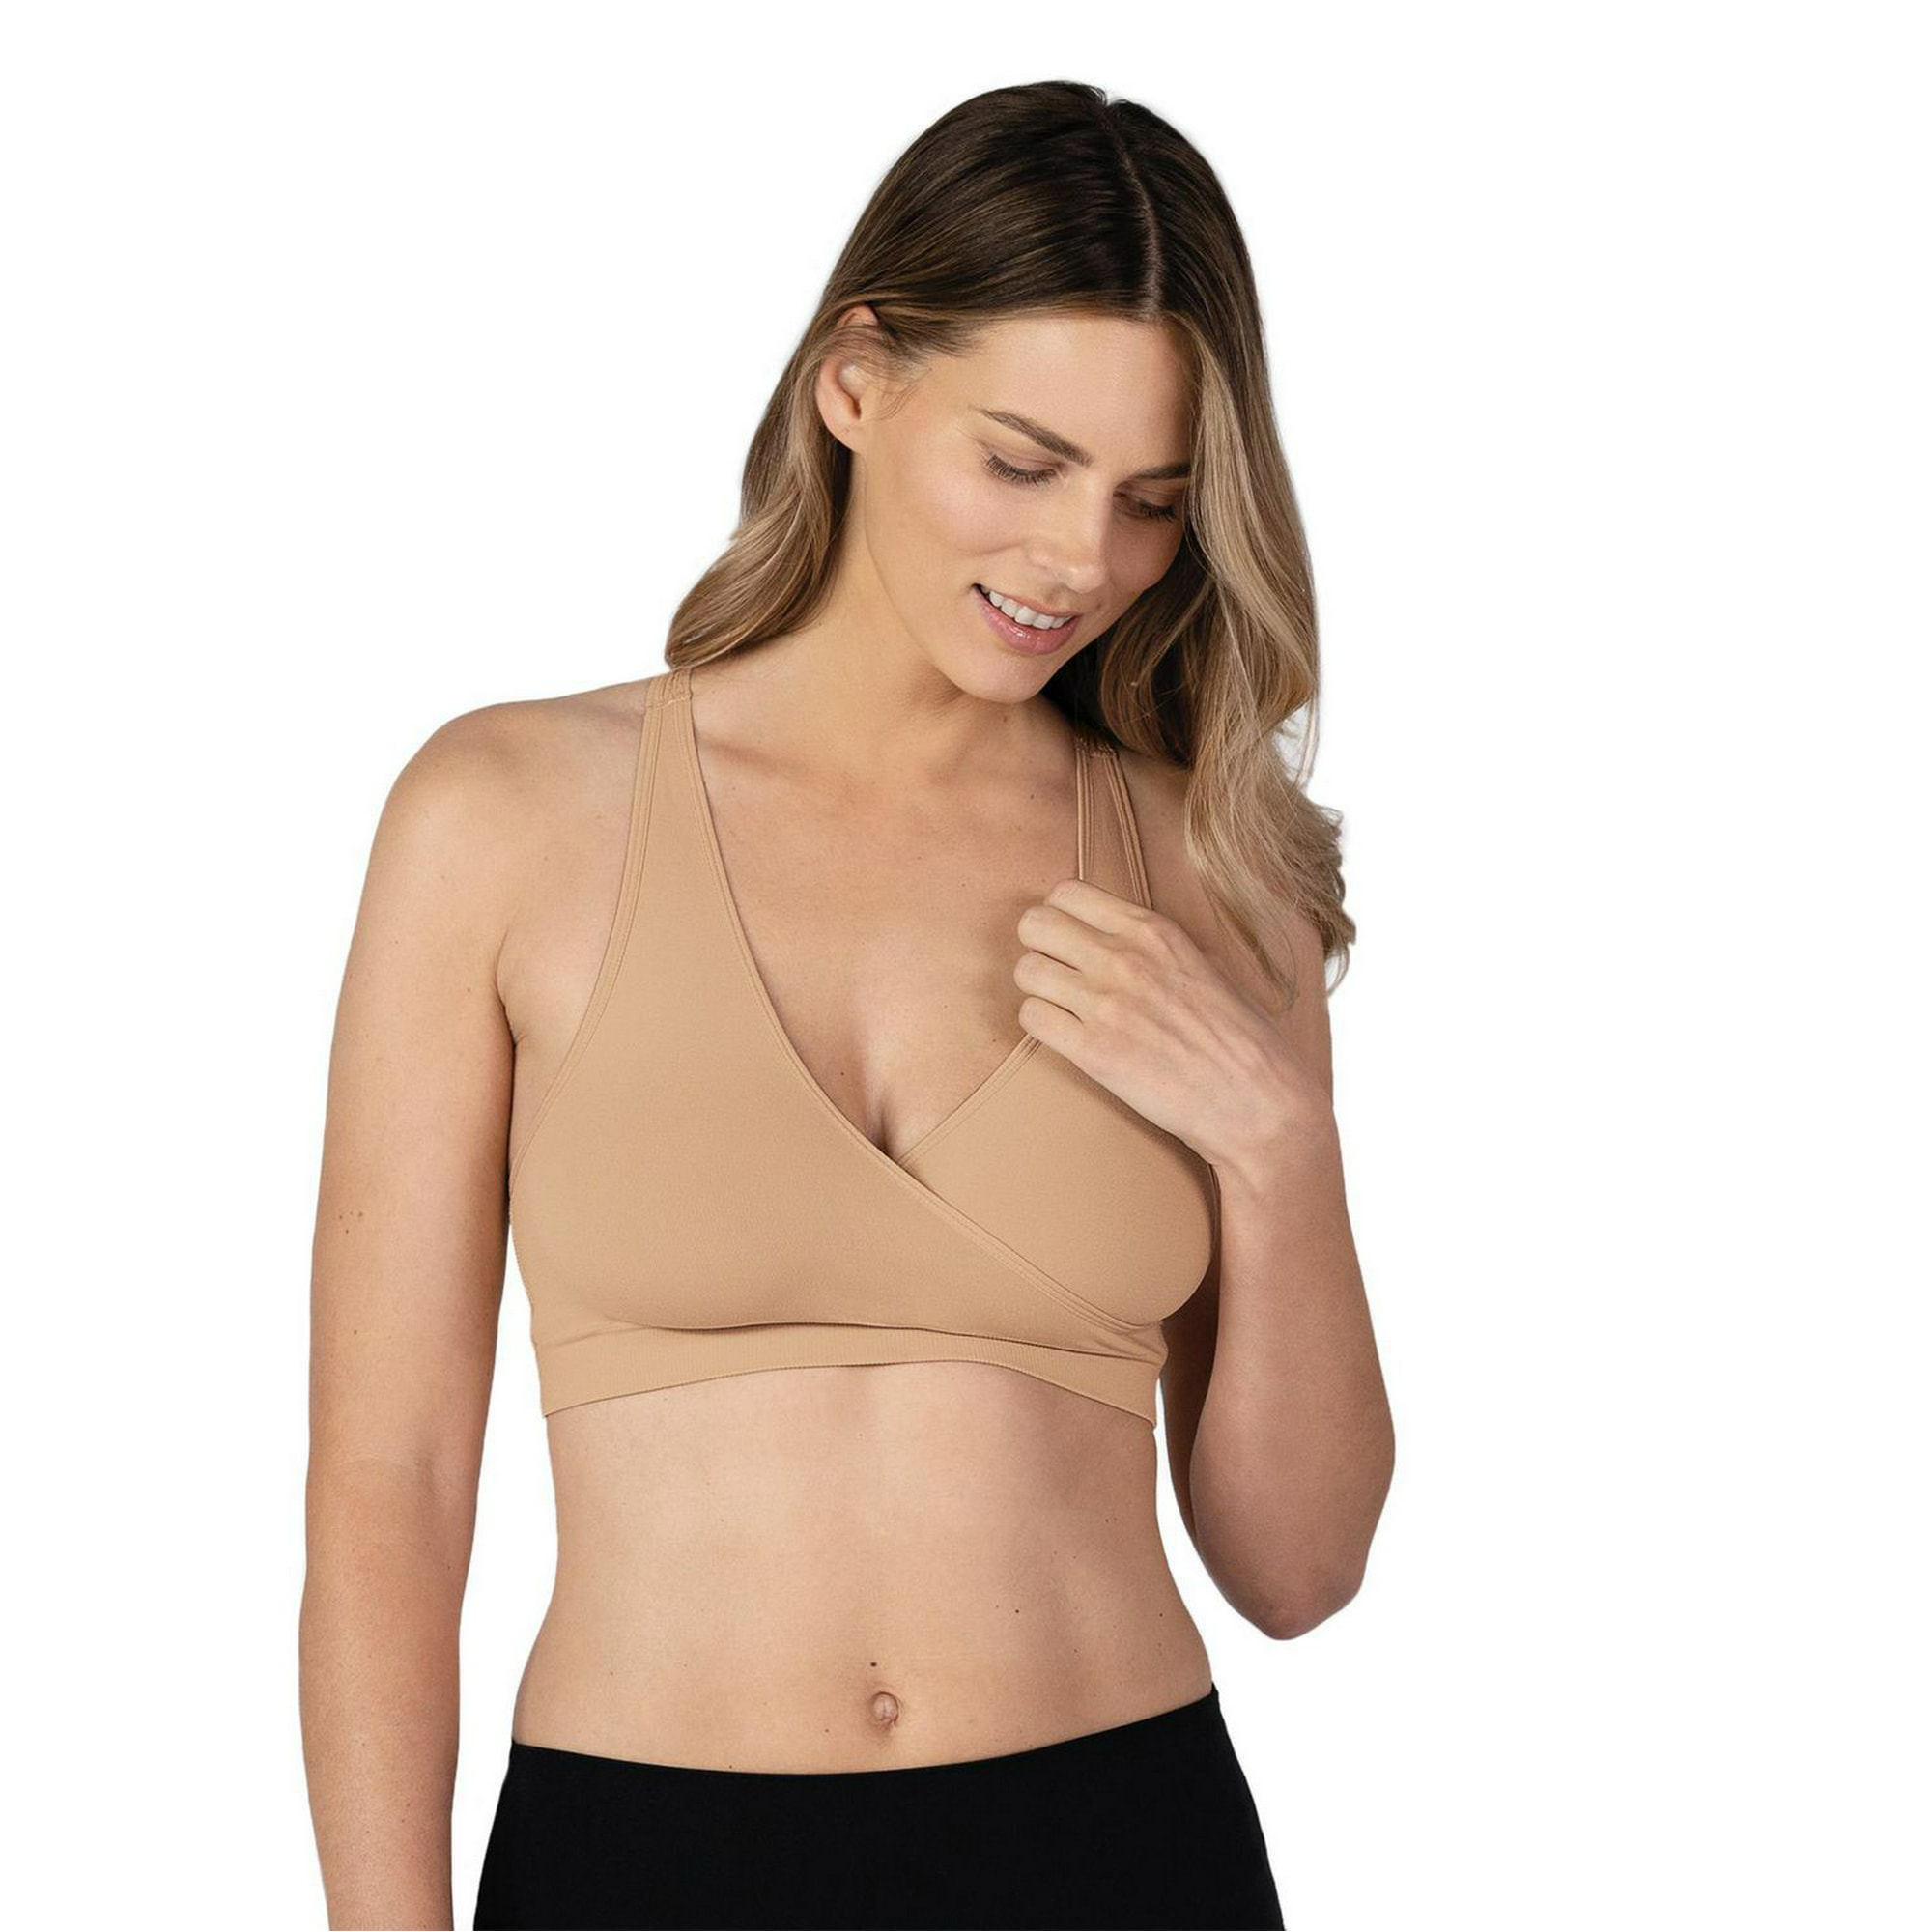 Buy Victoria's Secret PINK Pink Berry Seamless Air Sports Bra from